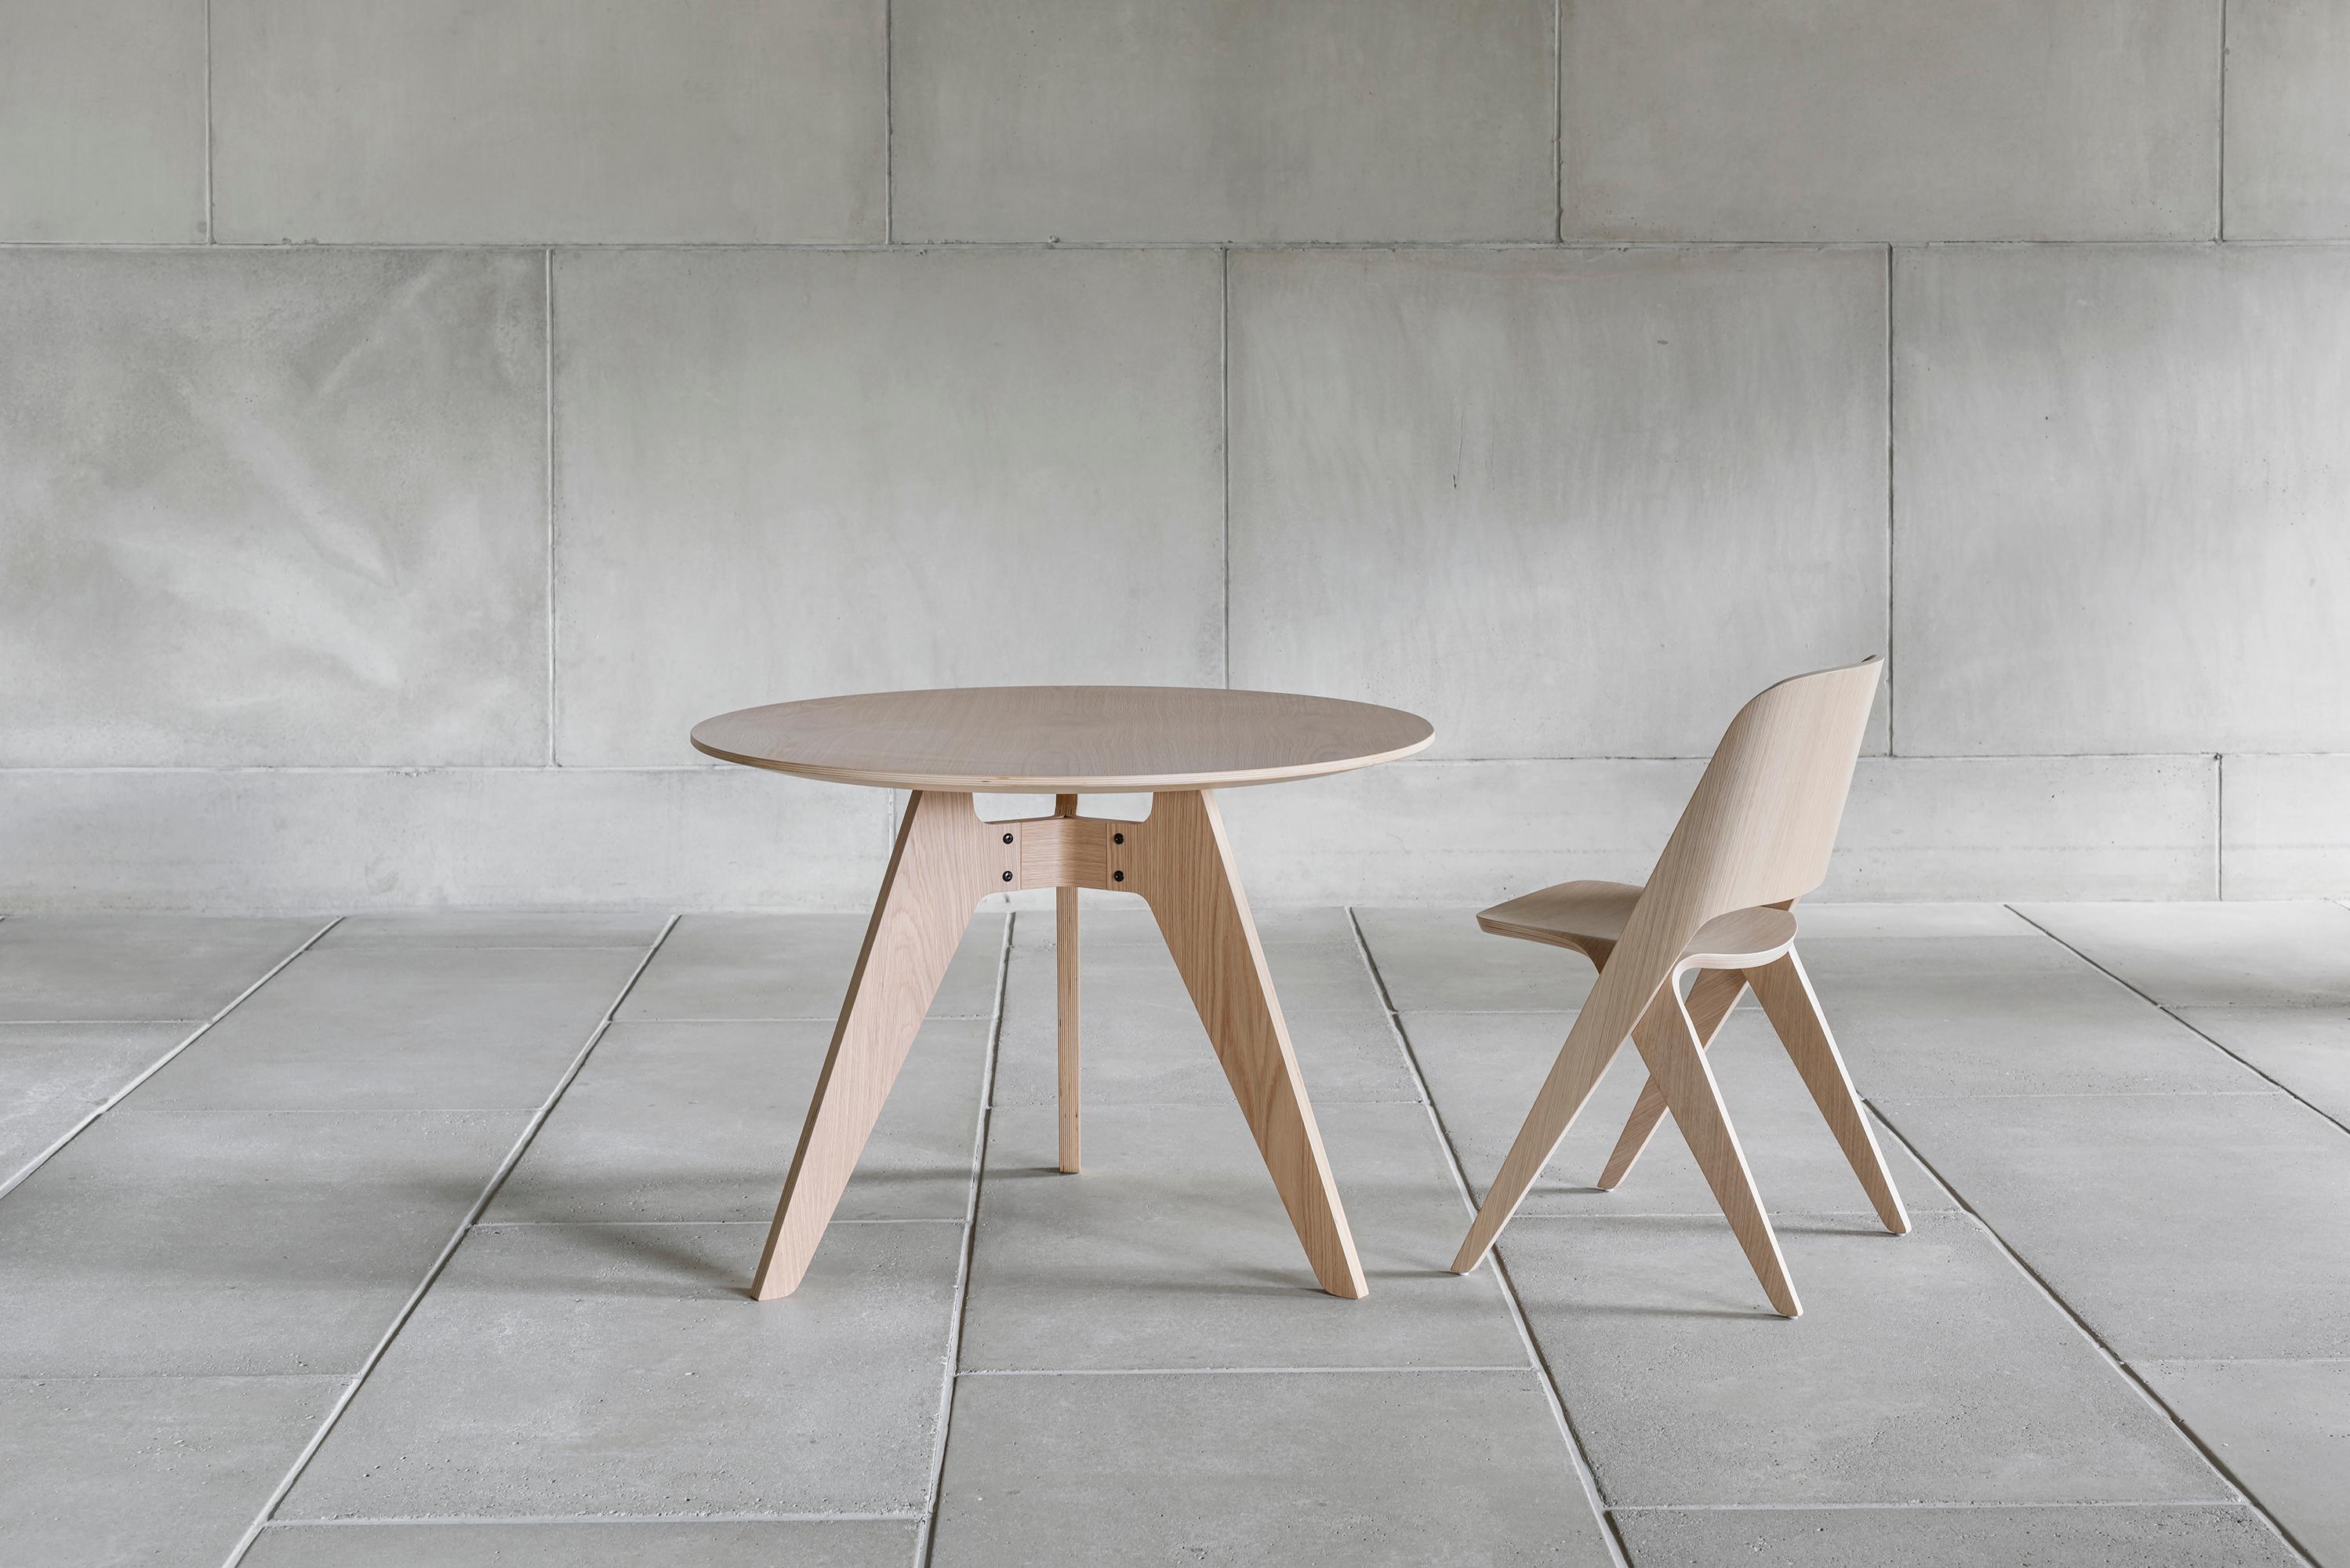 Lavitta round table (120 cm) designed by Timo Mikkonen & Antti Rouhunkoski
Collection Lavitta 2016 by Poiat 

Model shown on picture
Dimensions : H. 72 cm x D. 120 cm 
Color : Oak 
Four legs 

The Lavitta Collection draws upon the influences